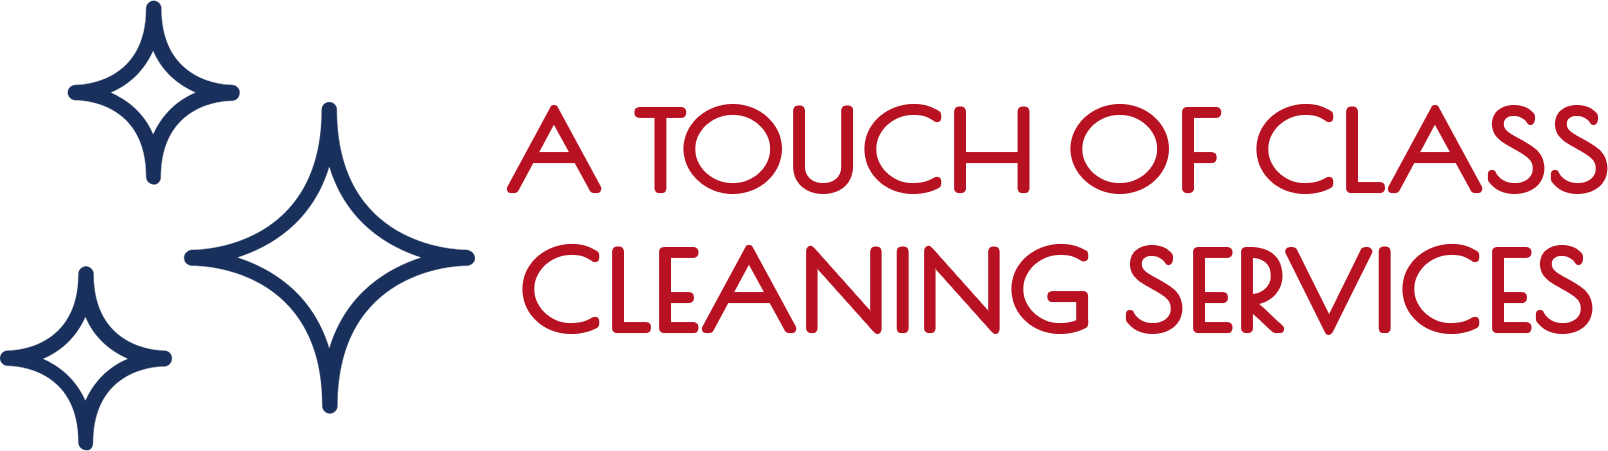 A Touch of Class Cleaning Services